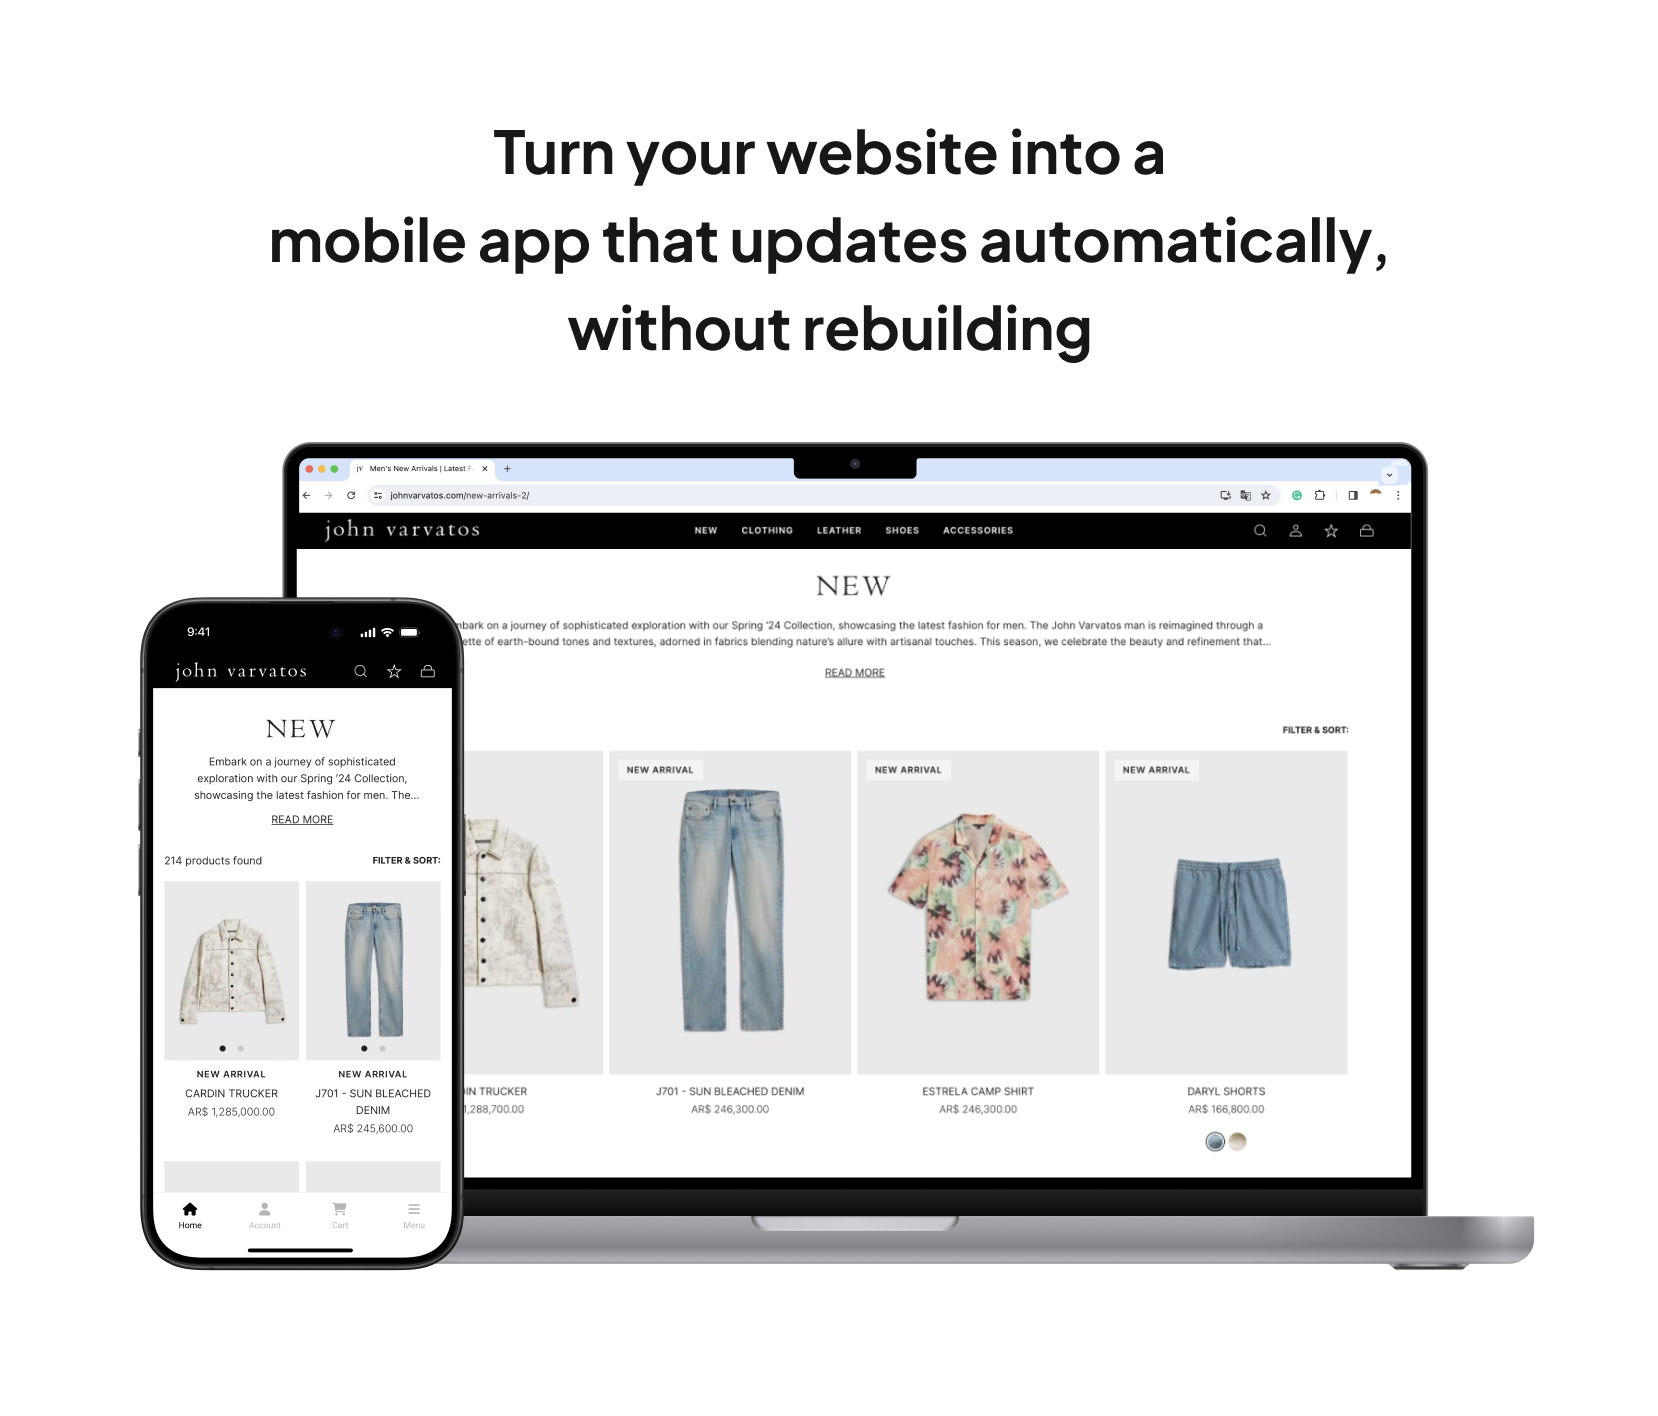 <strong>Update your website and app together</strong> - Your app and website are fully synced with any updates you make pushed to your app immediately, with no delay.